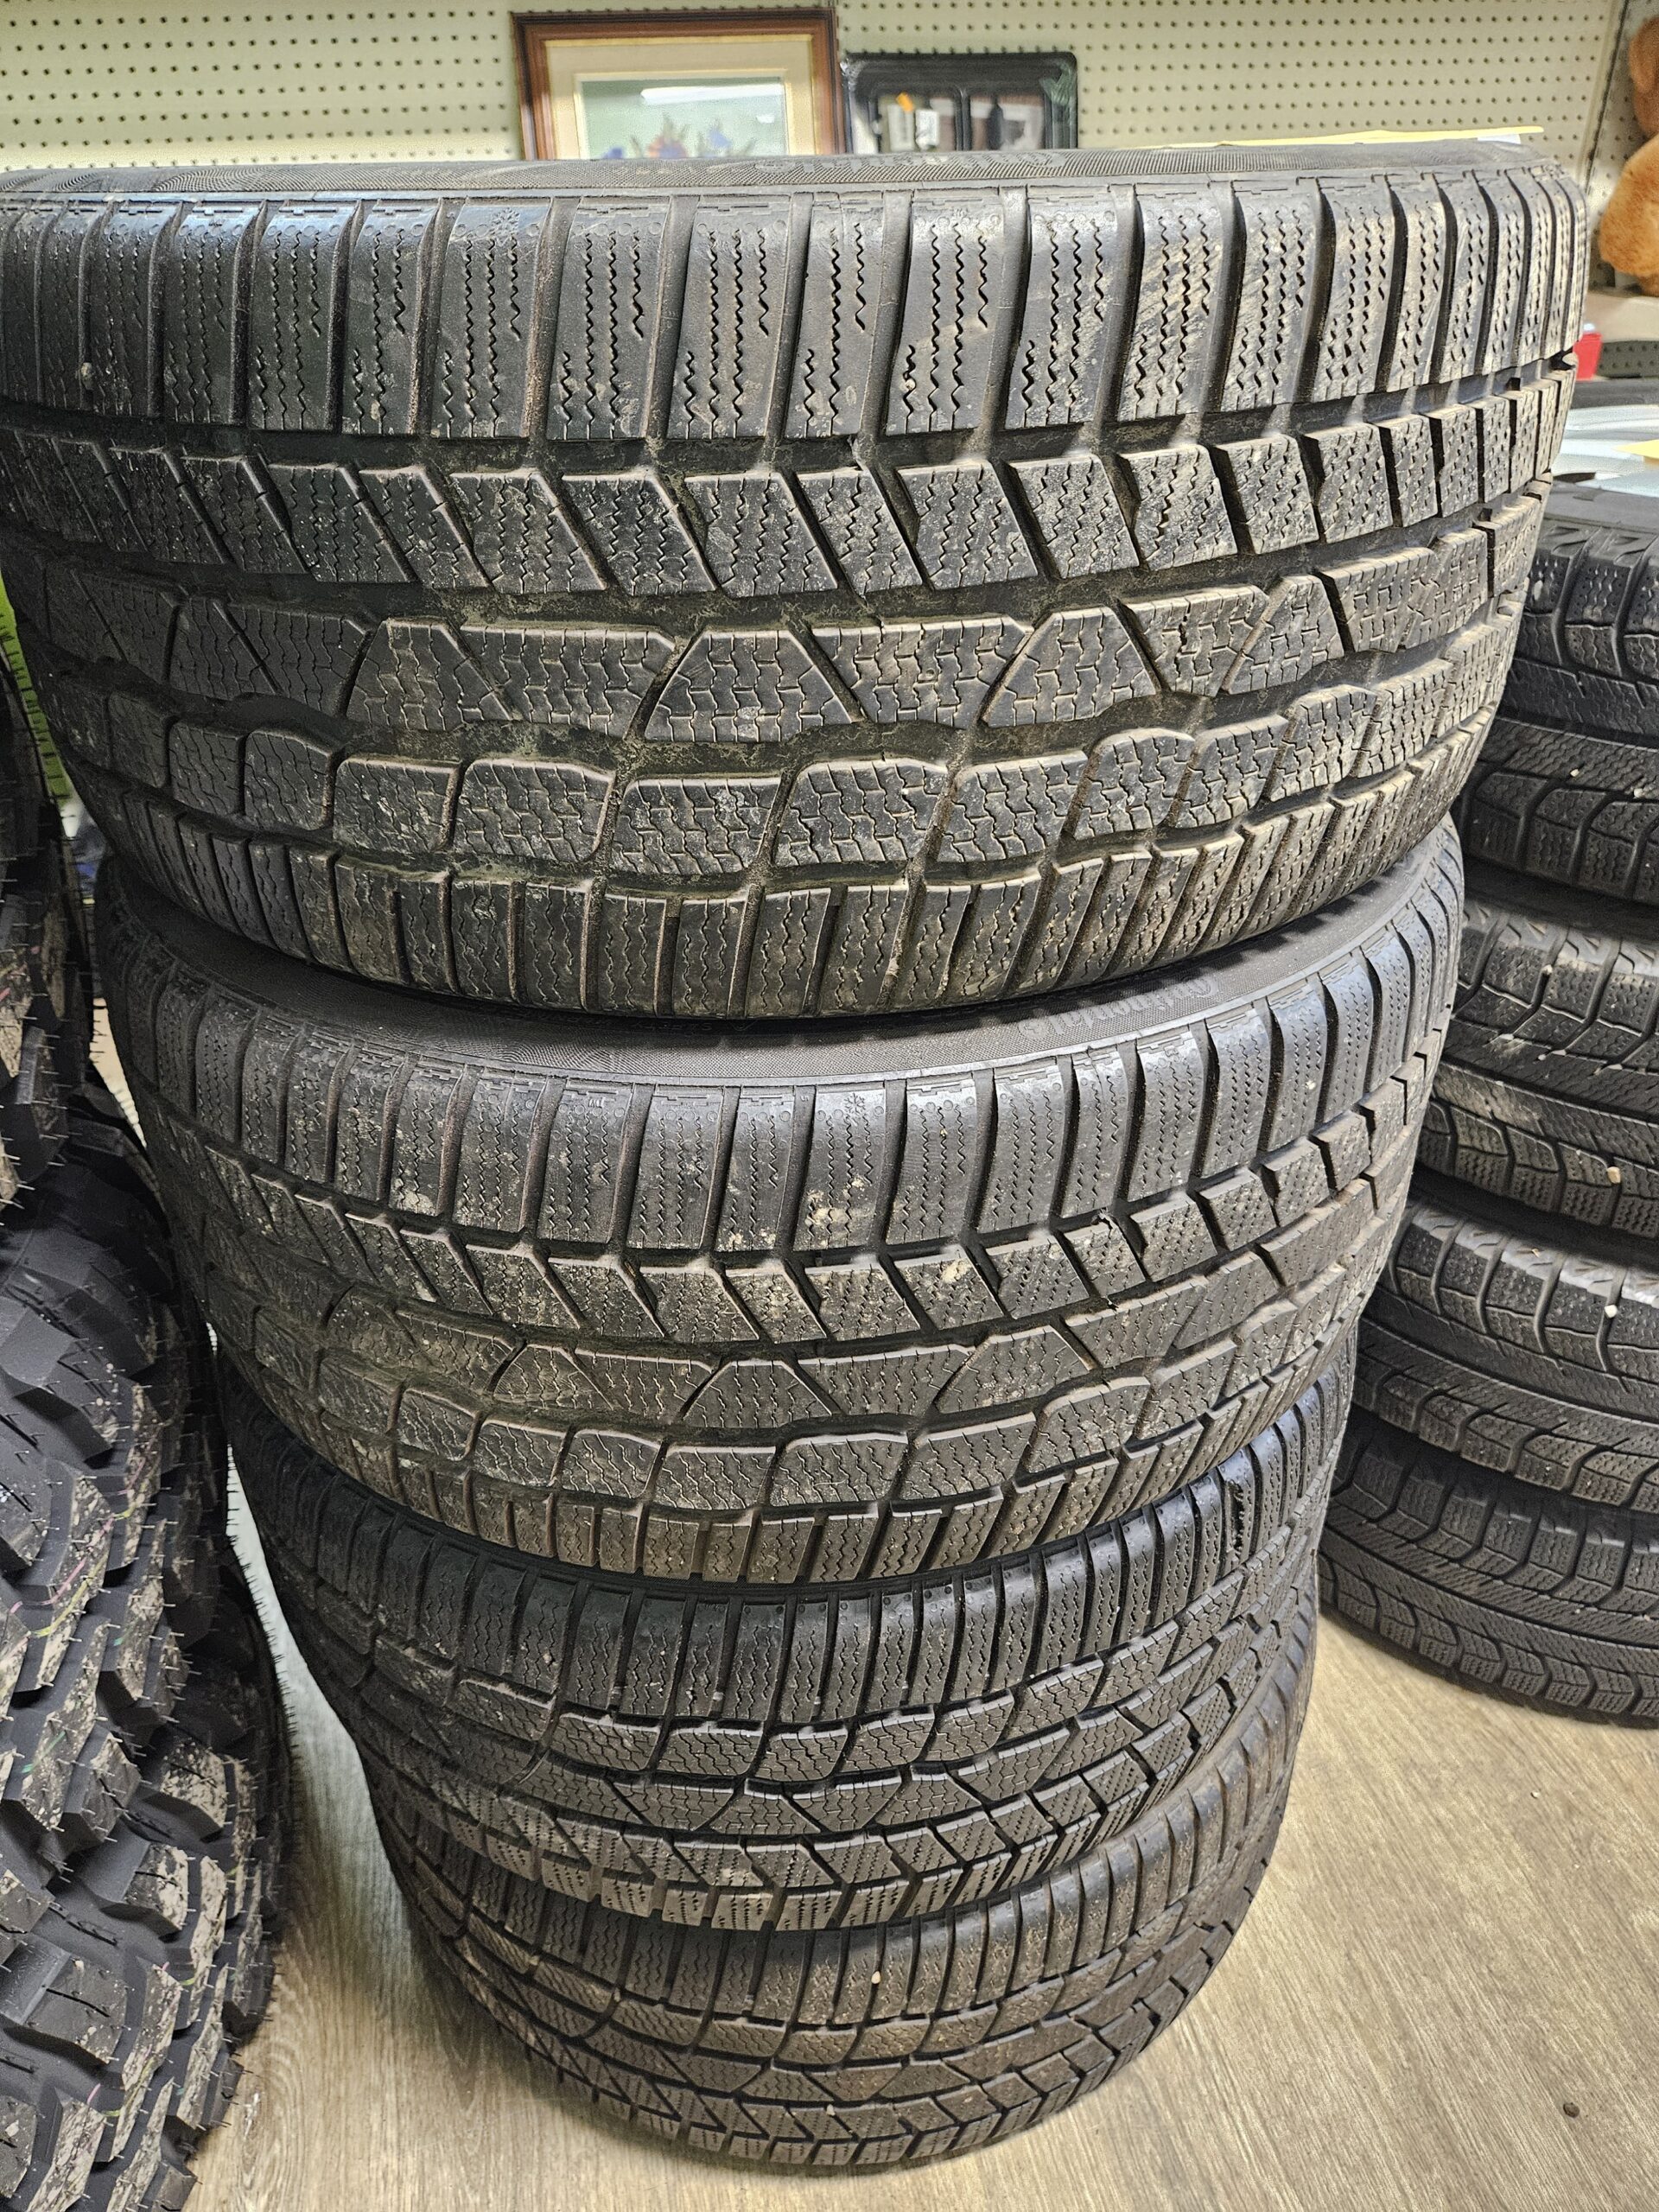 255/35R20 Continental Winter Tires